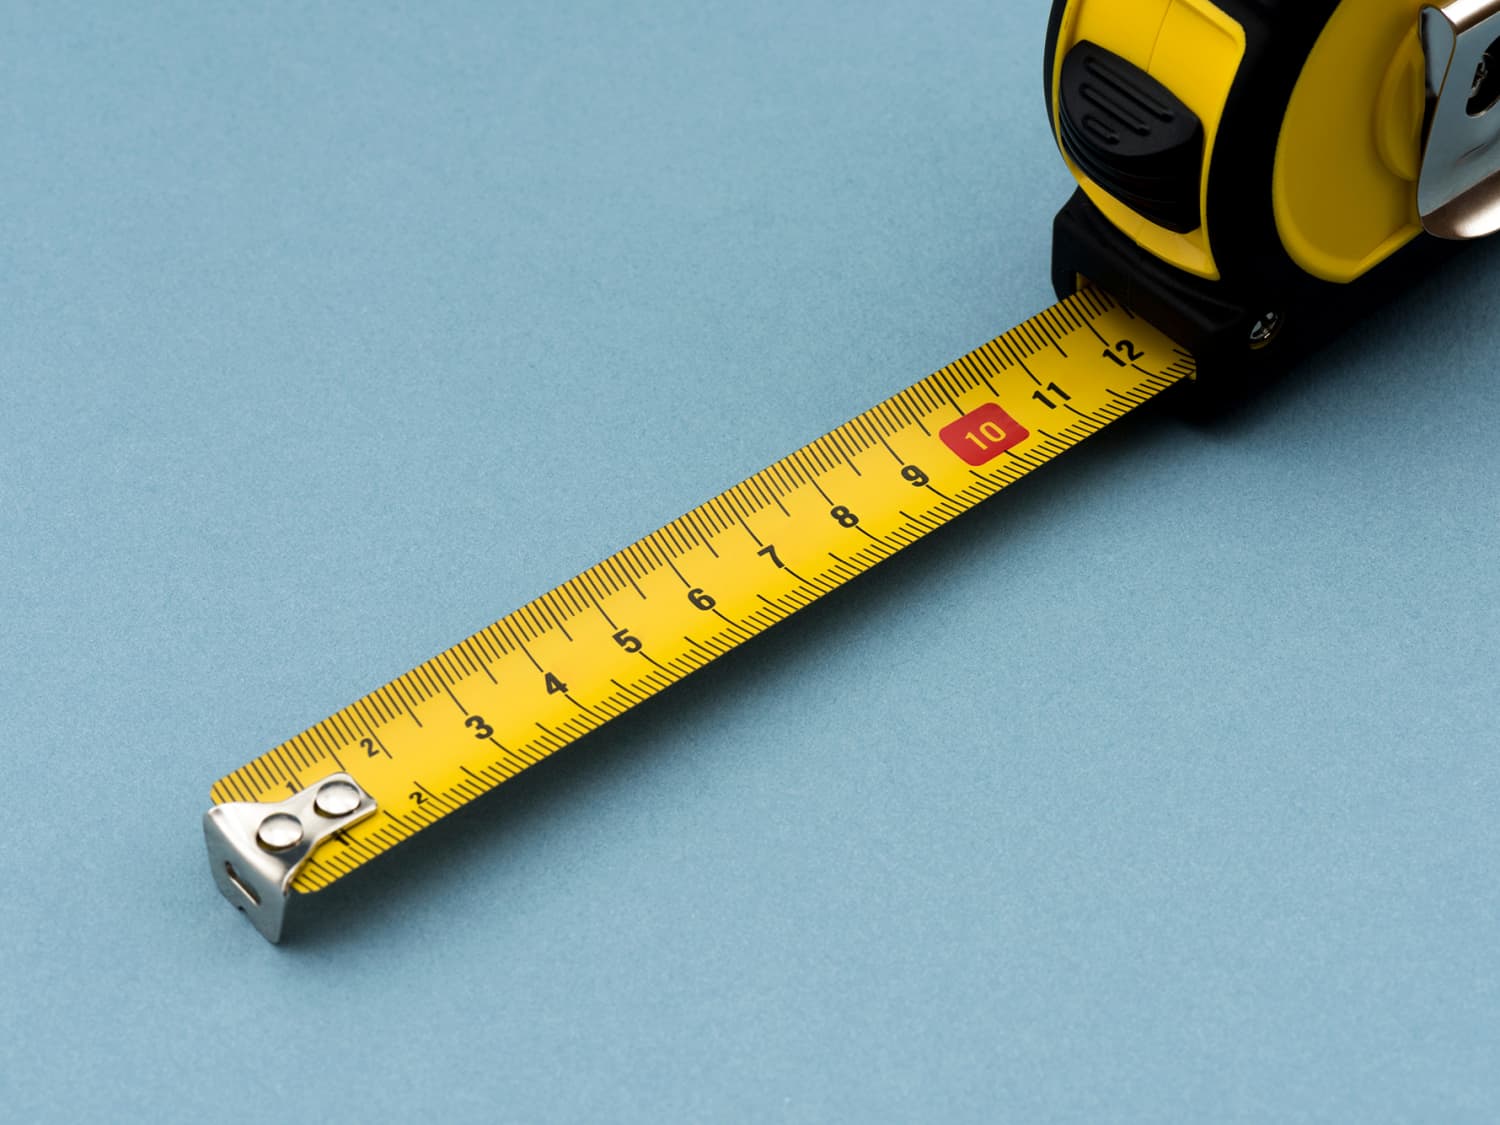 How to find clothes that fit online: Use a measuring tape - Reviewed